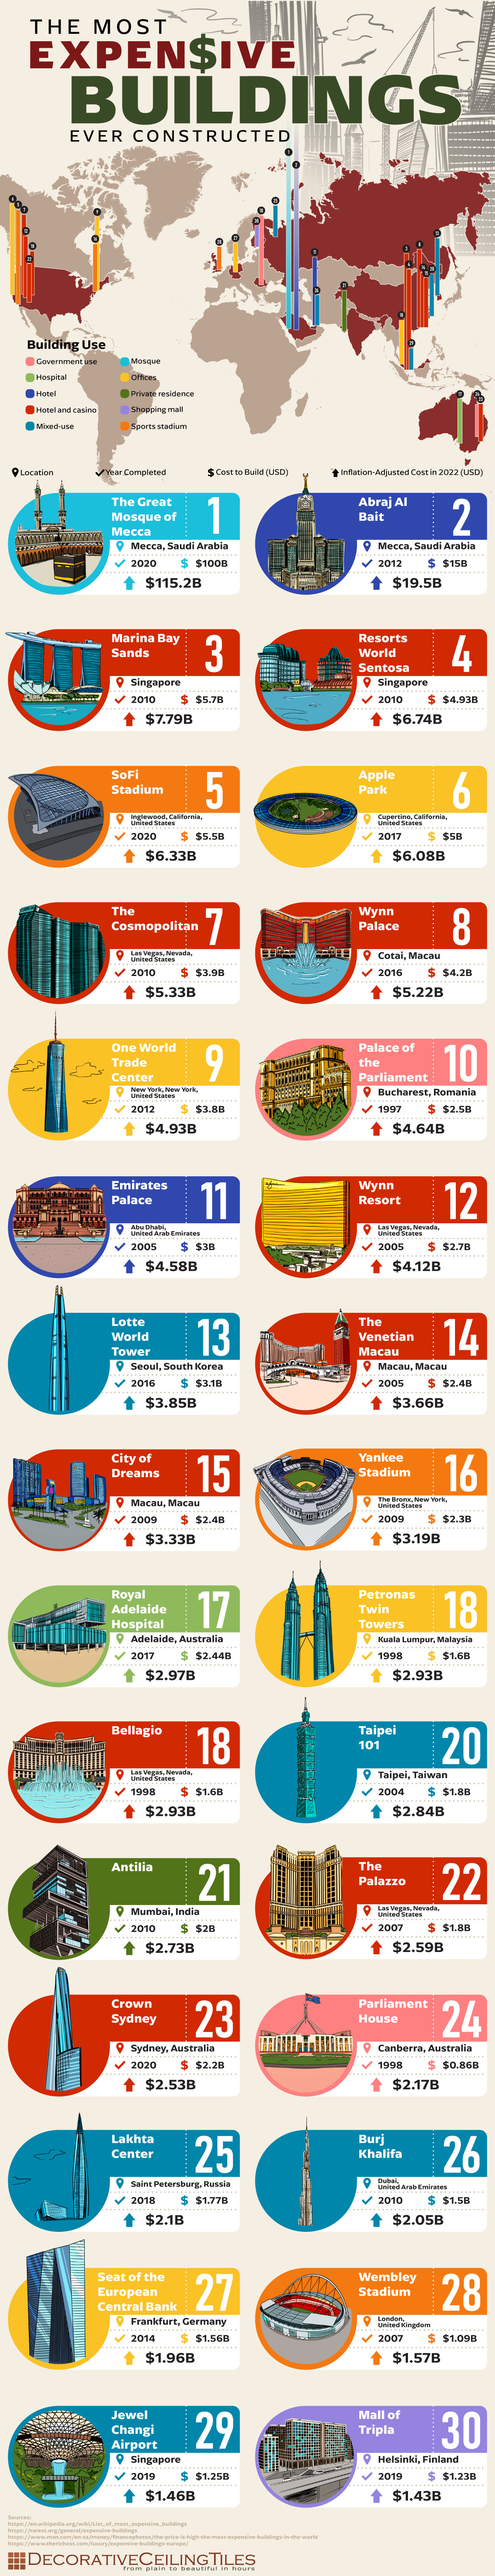 most-expensive-buildings-one-chart